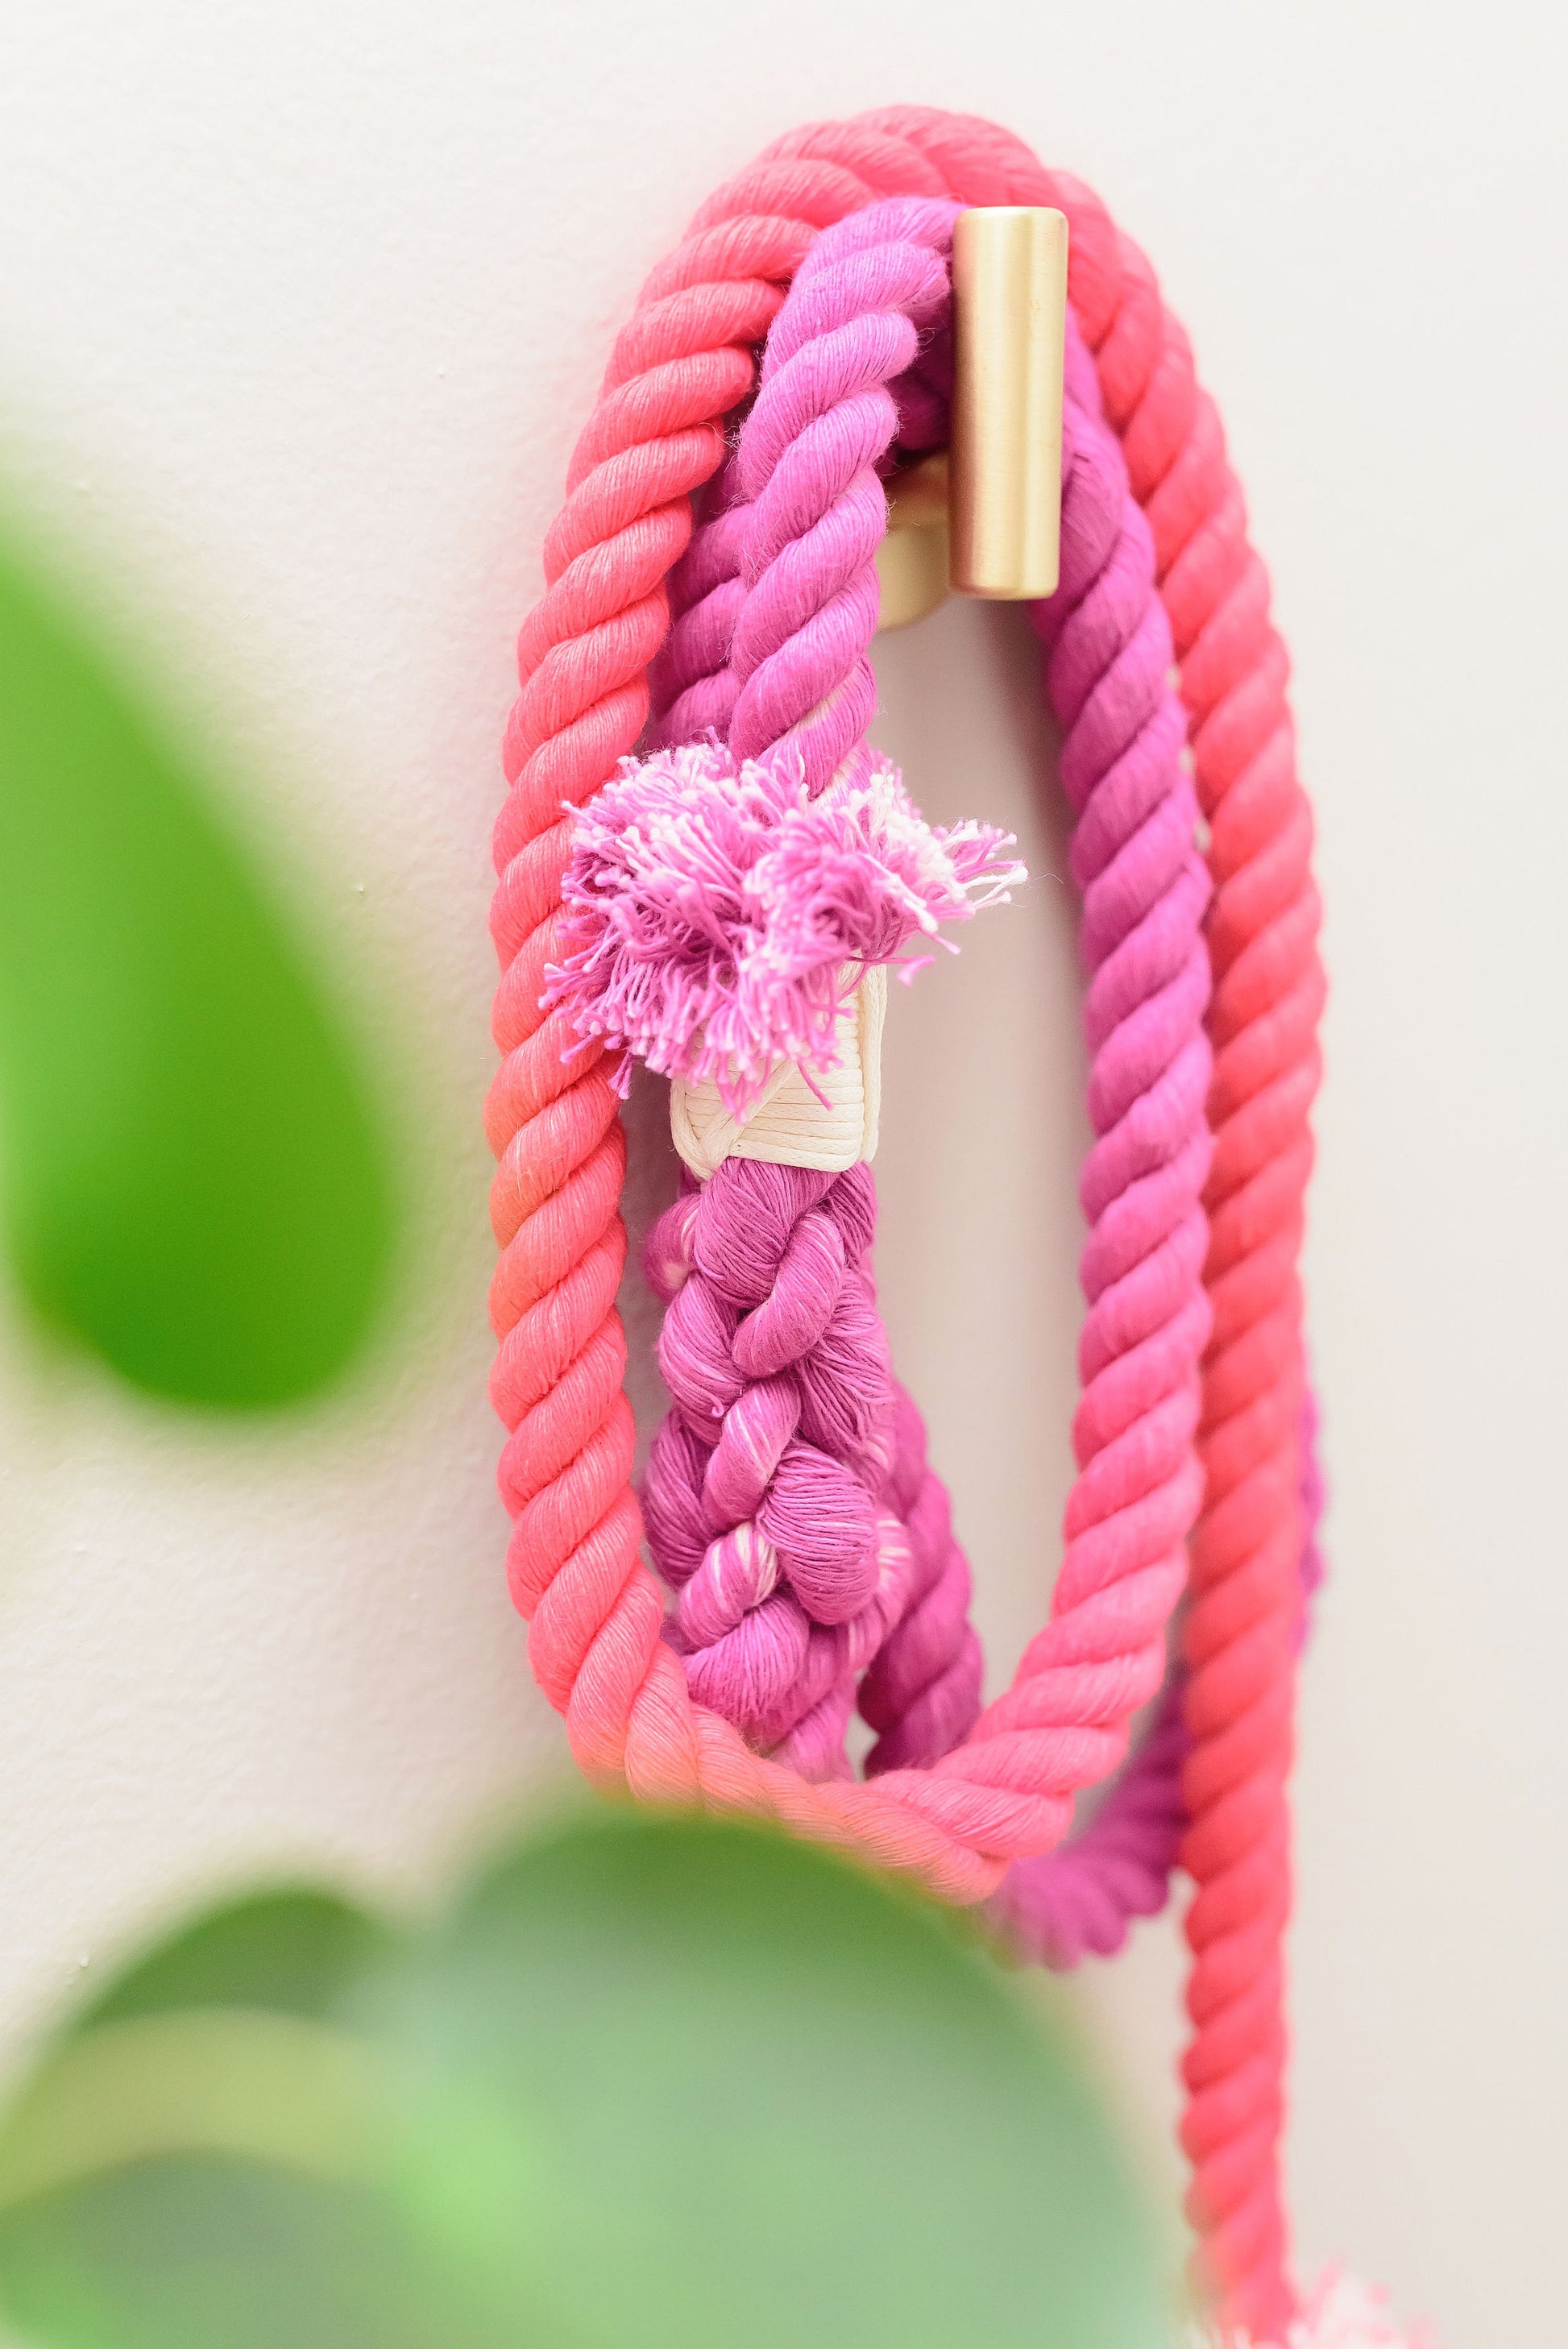 Ombré Purple and Coral Cotton Rope Leash - Dog Gift - Gift for Her - Pet Birthday Gift - Dog Accessory - Dog Lover Gift 